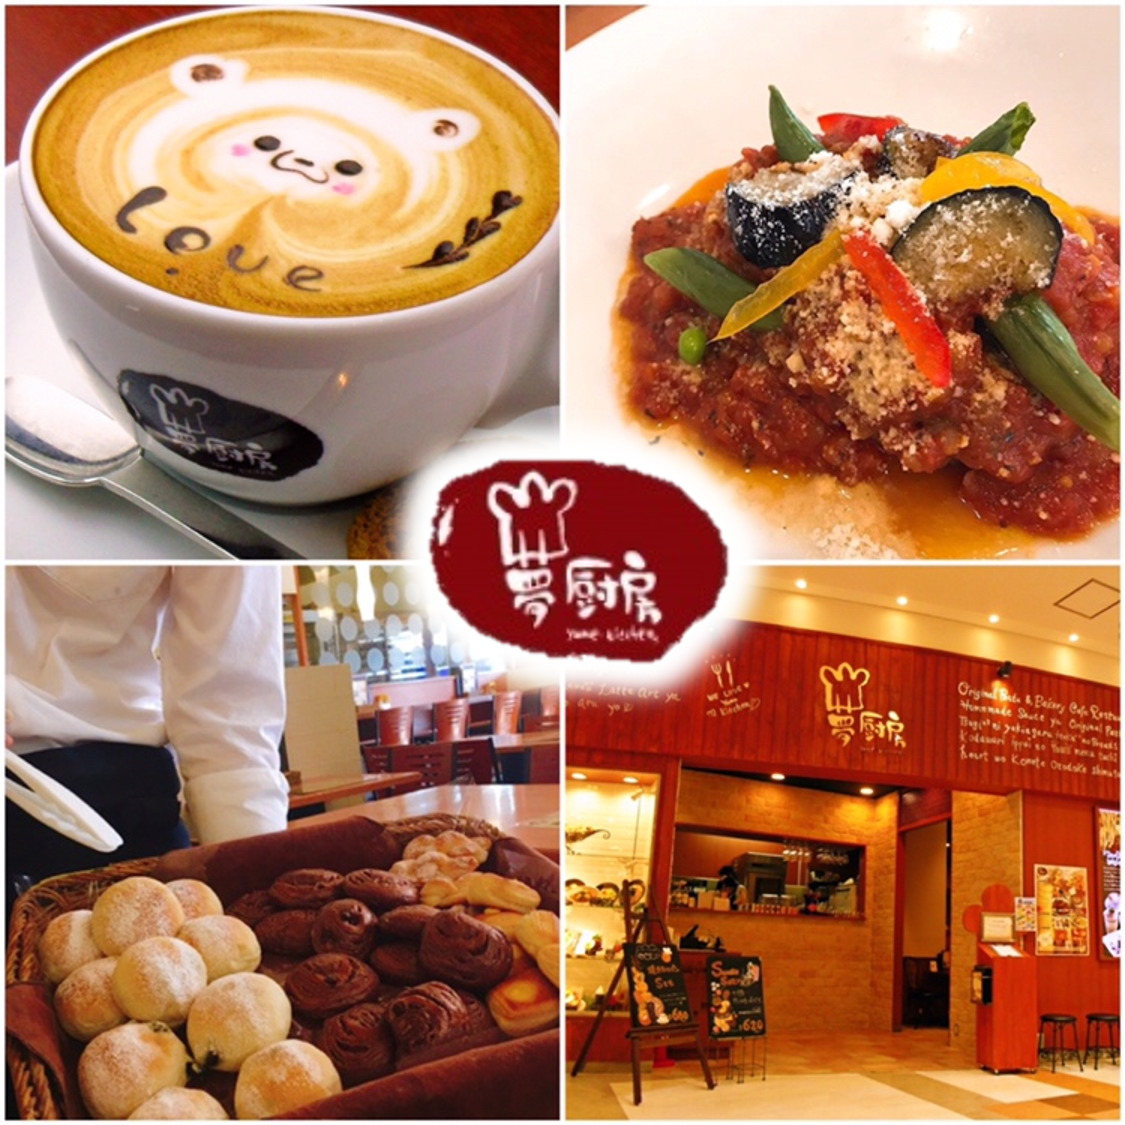 We are proud of handmade dishes and desserts that enjoy freshly baked bread and seasonal ingredients as a substitute ♪